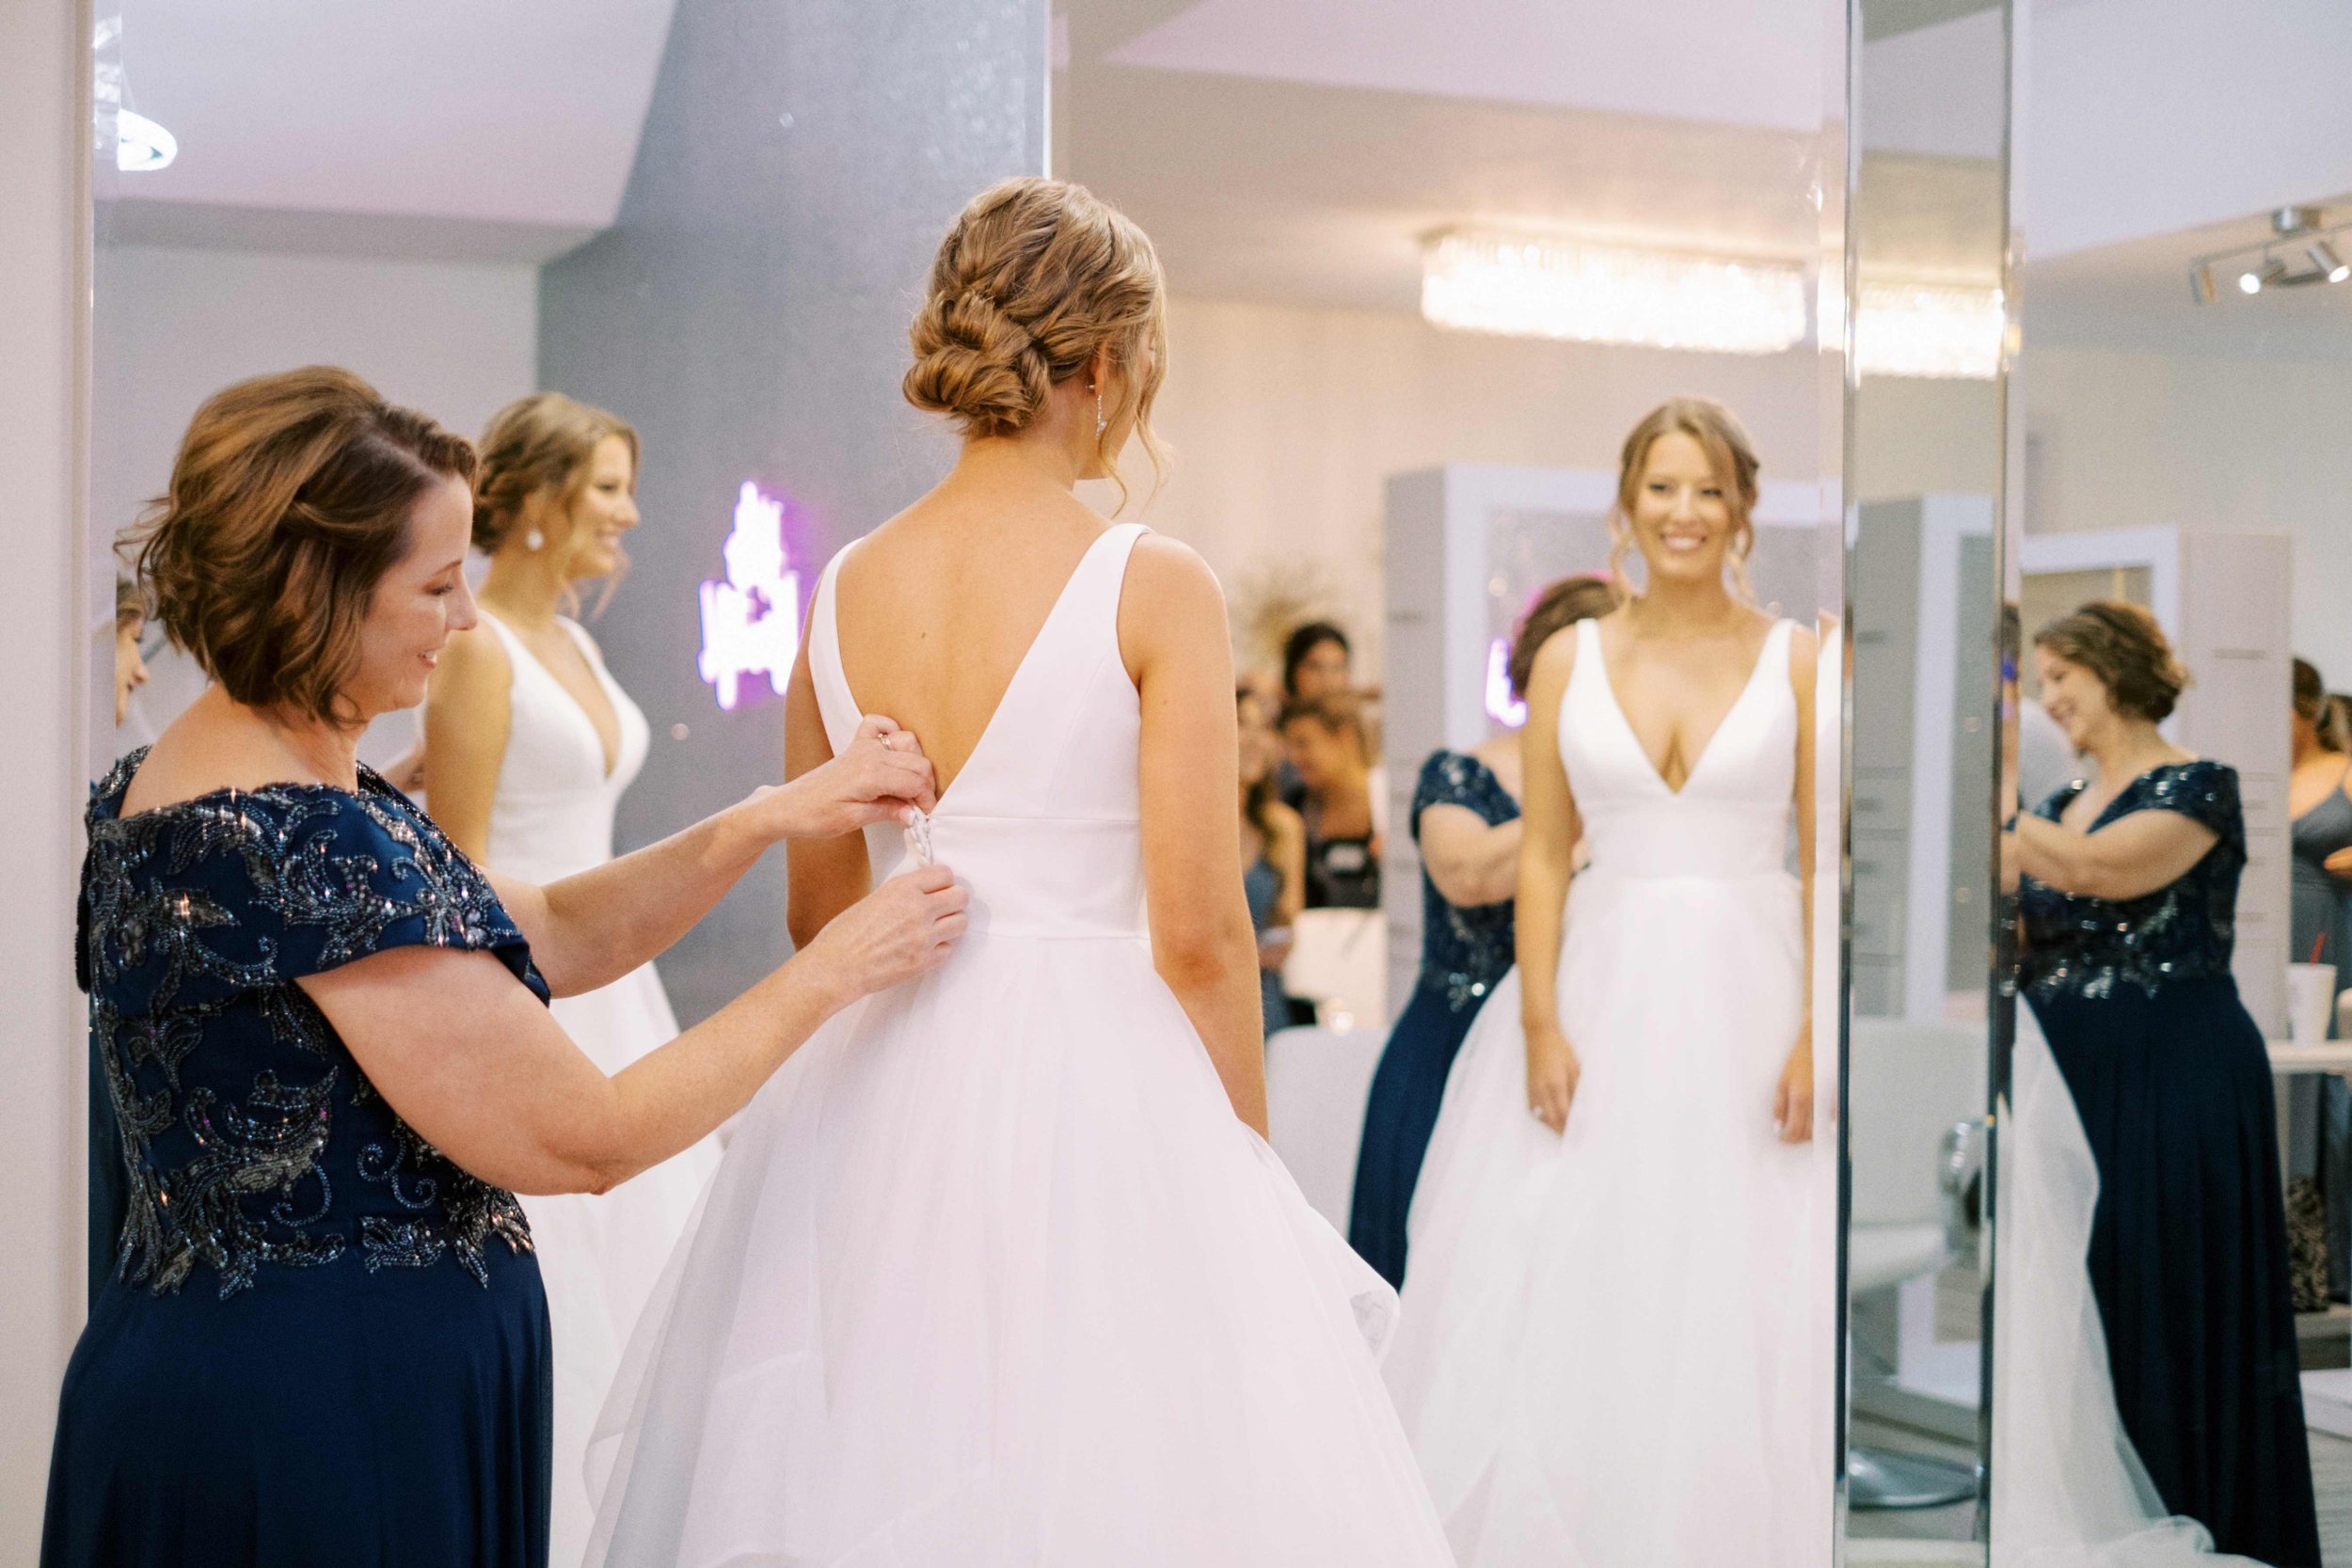 A mother helps her daughter into her wedding gown, bridesmaids look on and smile